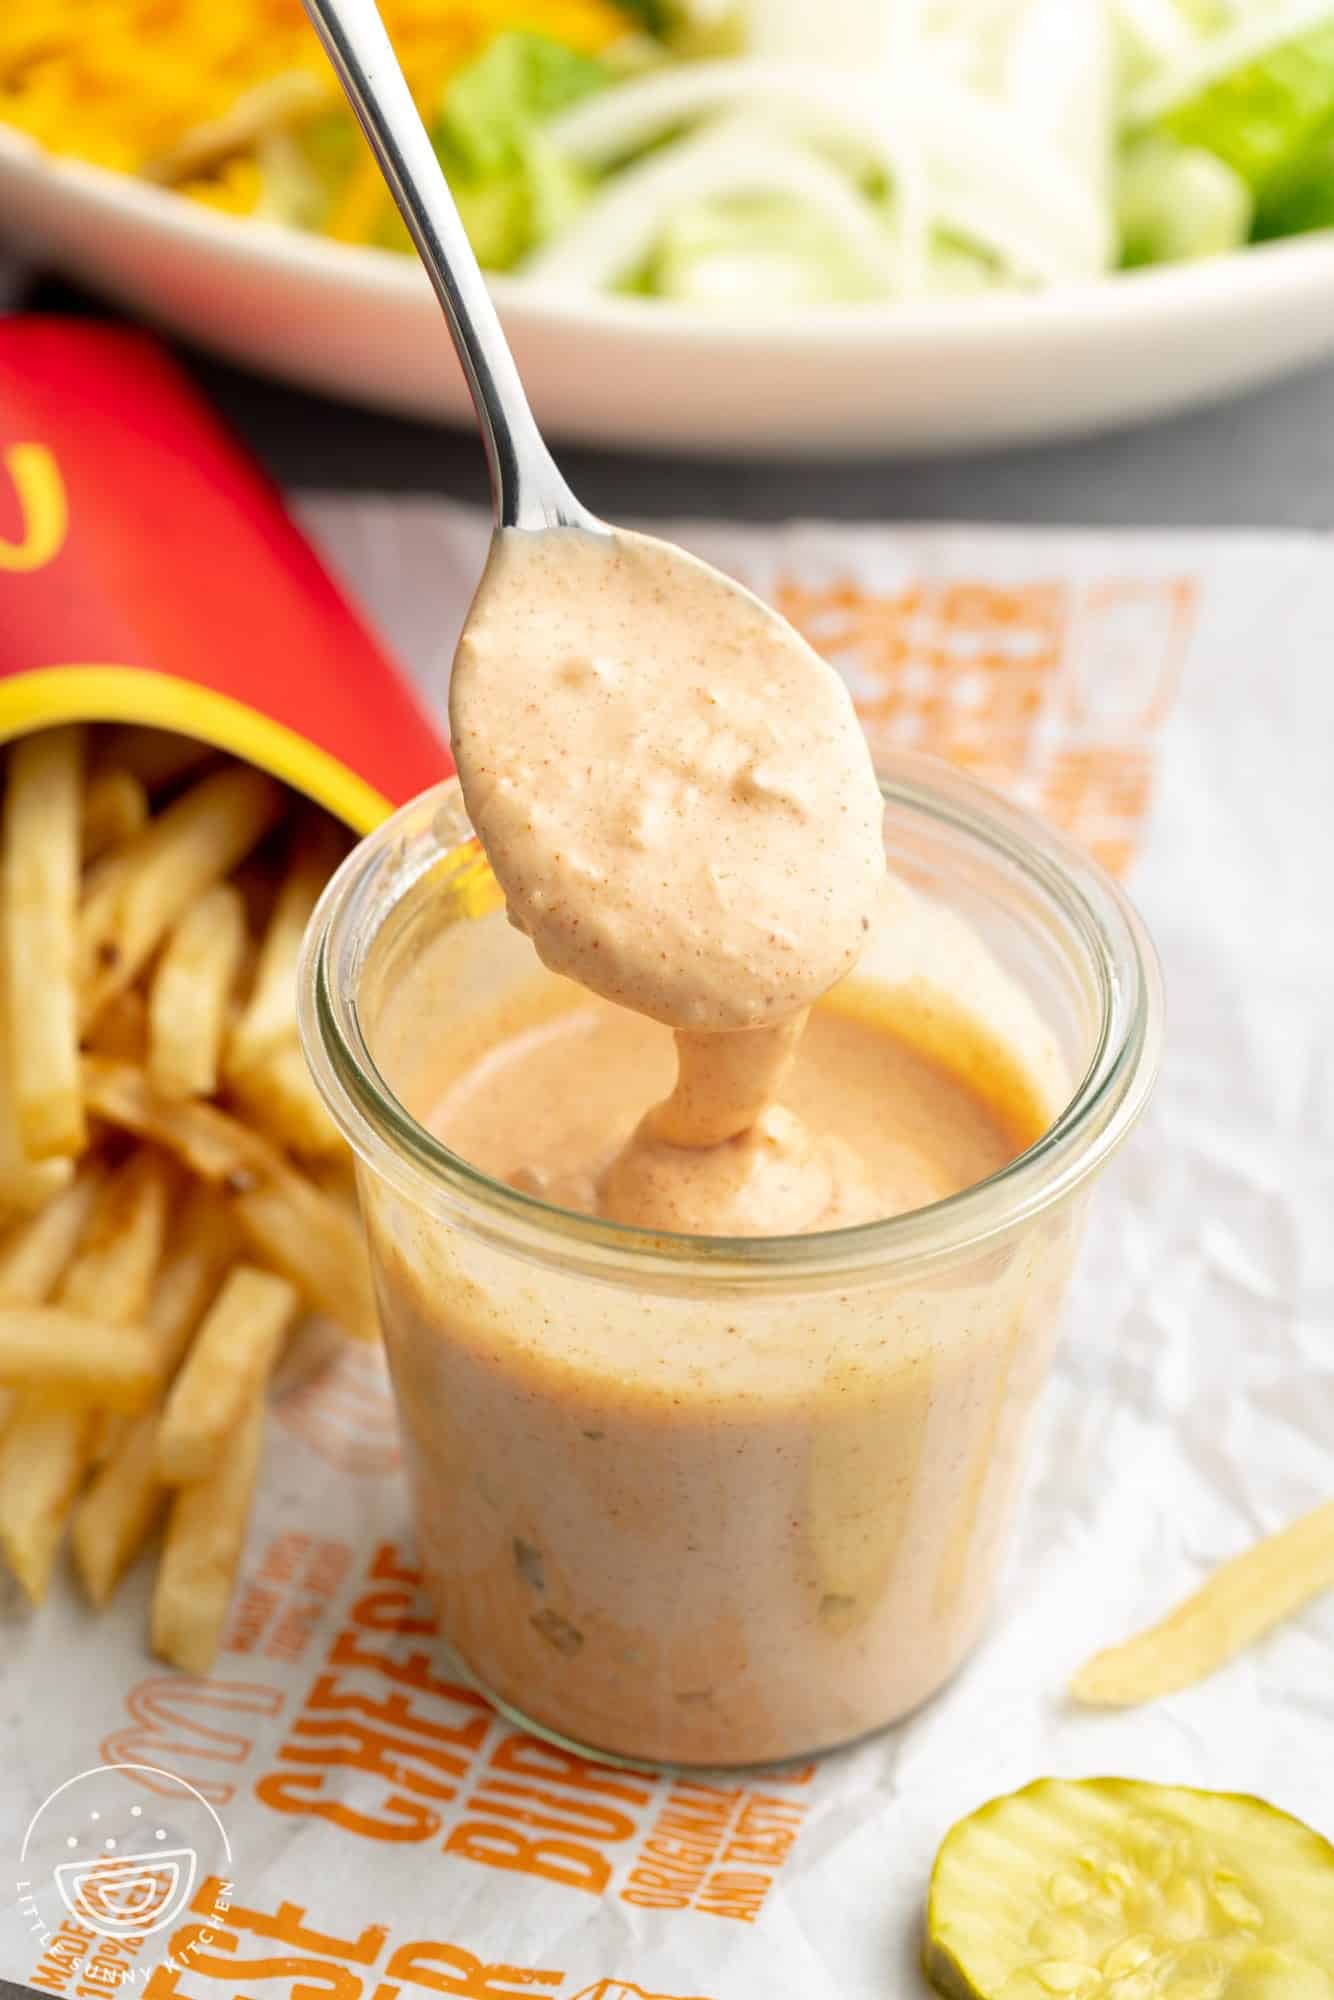 a glass cup filled with homemade big mac sauce, next to a box of mcdonalds fries.